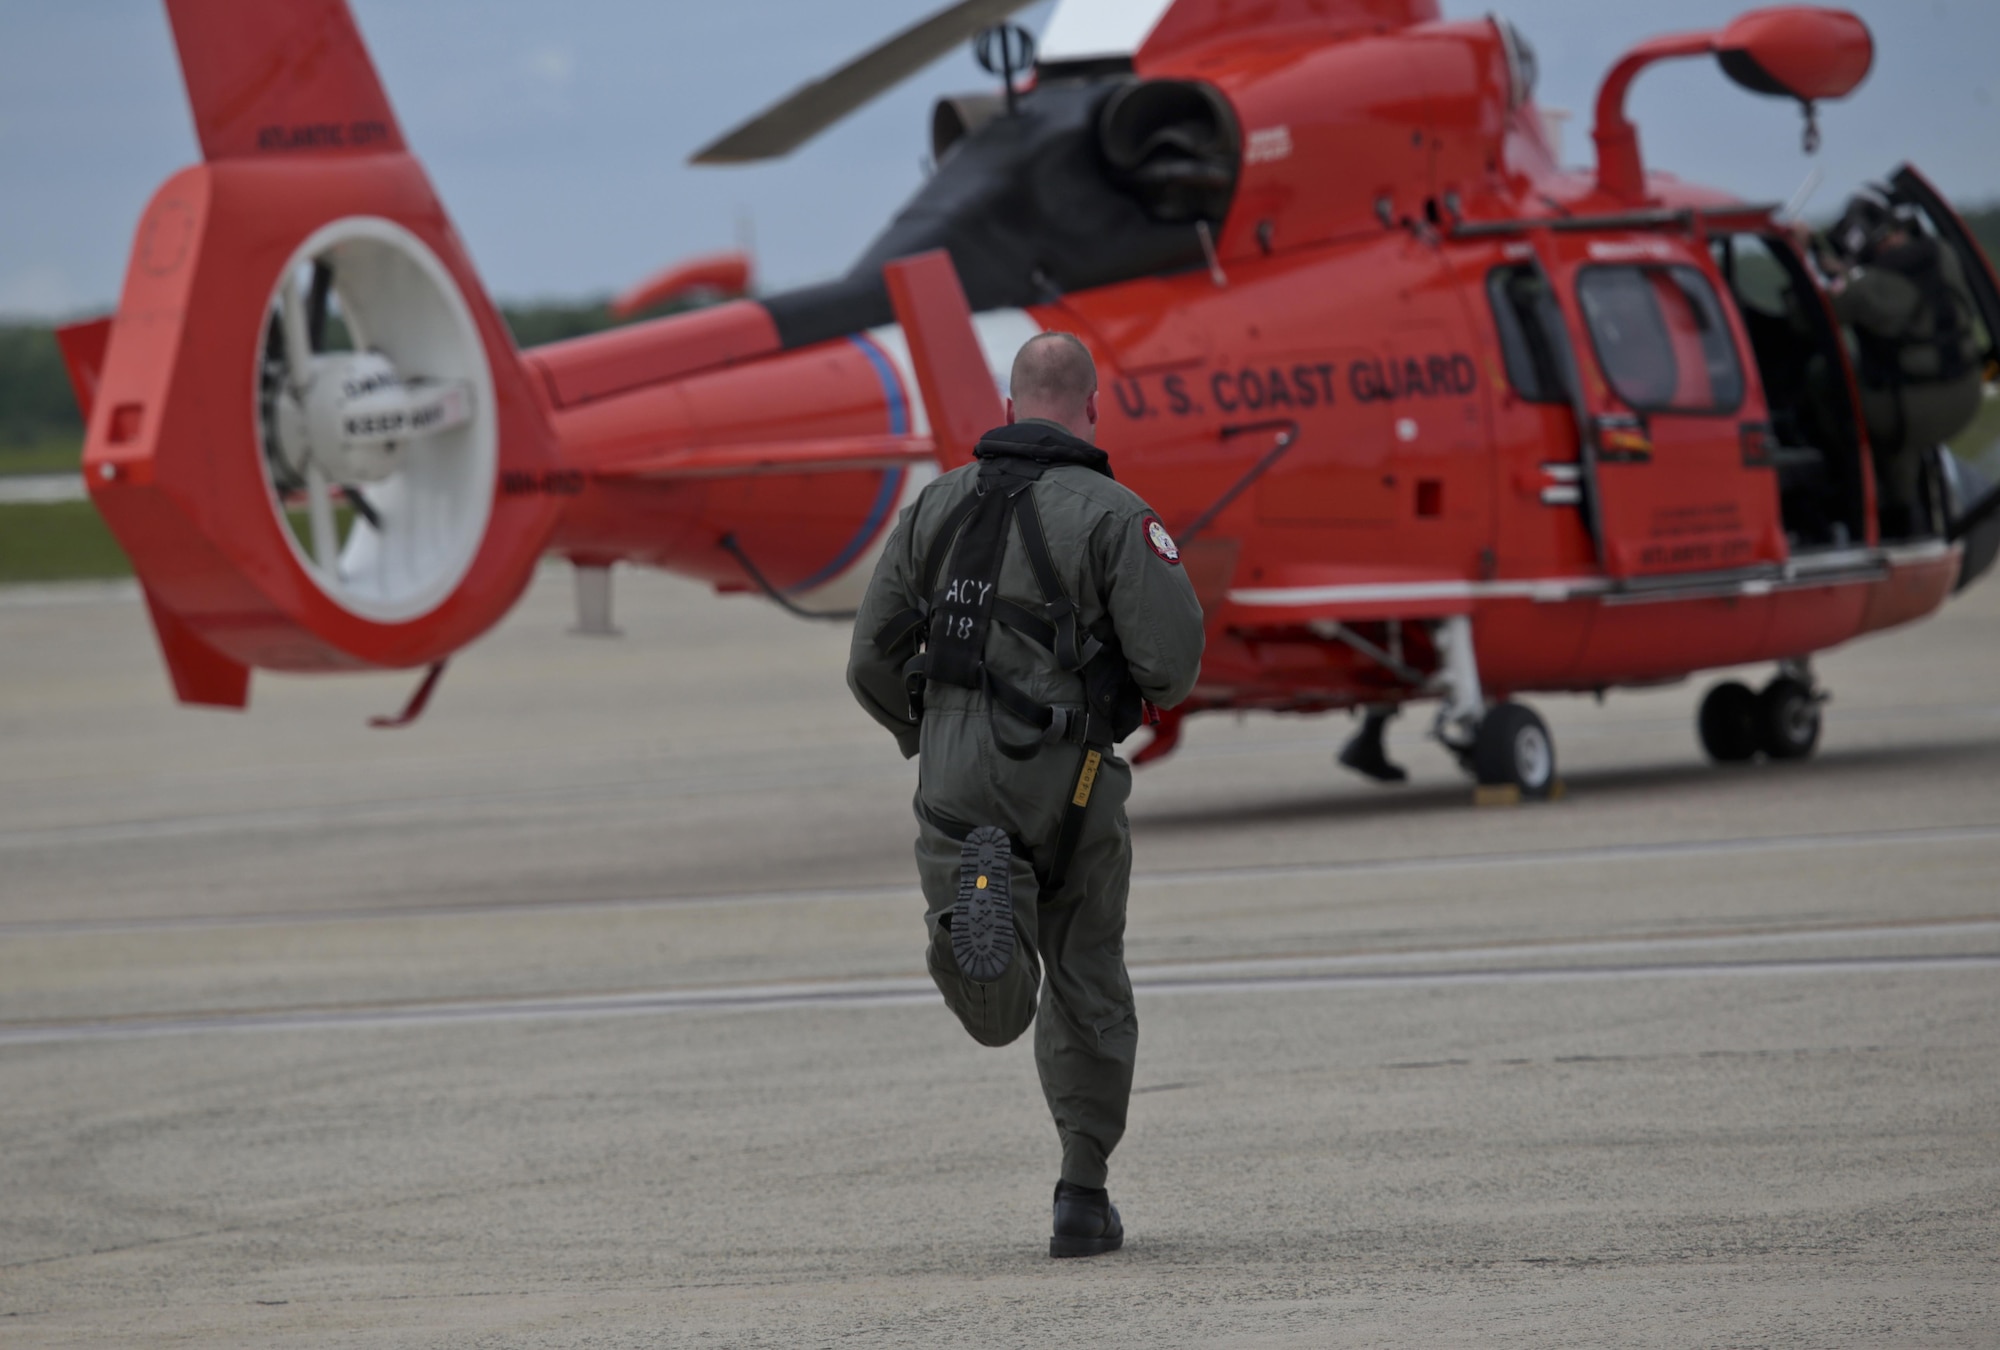 A U.S. Coast Guard HH-65C Dolphin crew member from Coast Guard Air Station Atlantic City runs to his helicopter after an alert during a three-day Aeropsace Control Alert CrossTell live-fly training exercise at Atlantic City International Airport, N.J., May 24, 2017. Representatives from the Air National Guard fighter wings, Civil Air Patrol, and U.S. Coast Guard rotary-wing air intercept units will conduct daily sorties from May 23-25 to hone their skills with tactical-level air-intercept procedures. (U.S. Air National Guard photo by Master Sgt. Matt Hecht/Released)